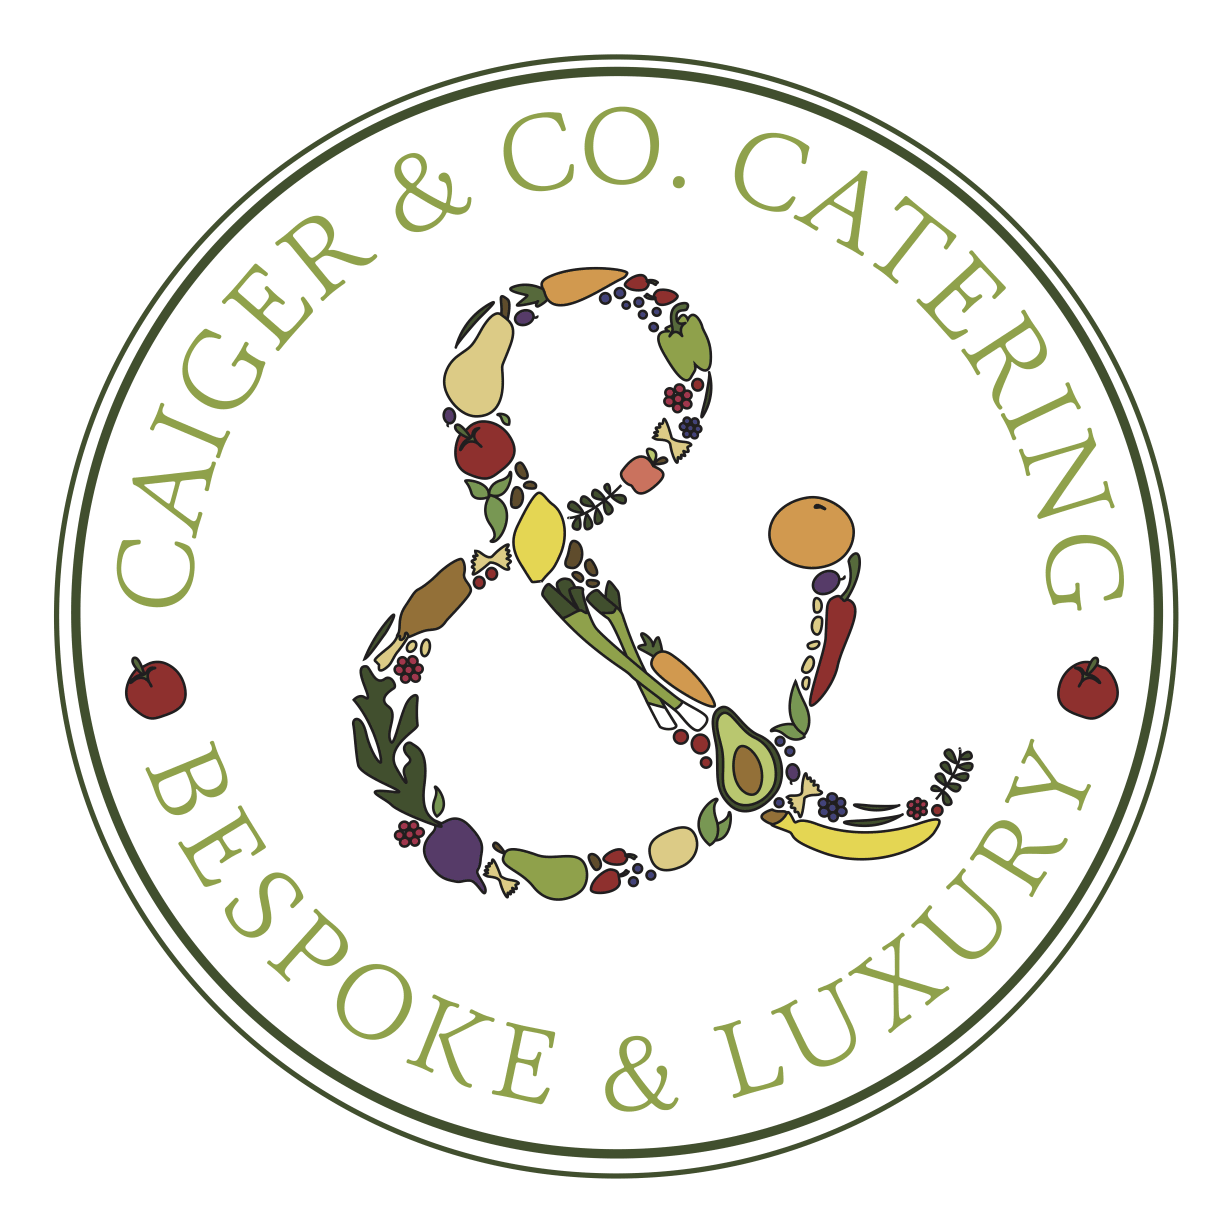 Caiger & Co. As a leading catering company in London, we believe that exceptional food and service are the key...